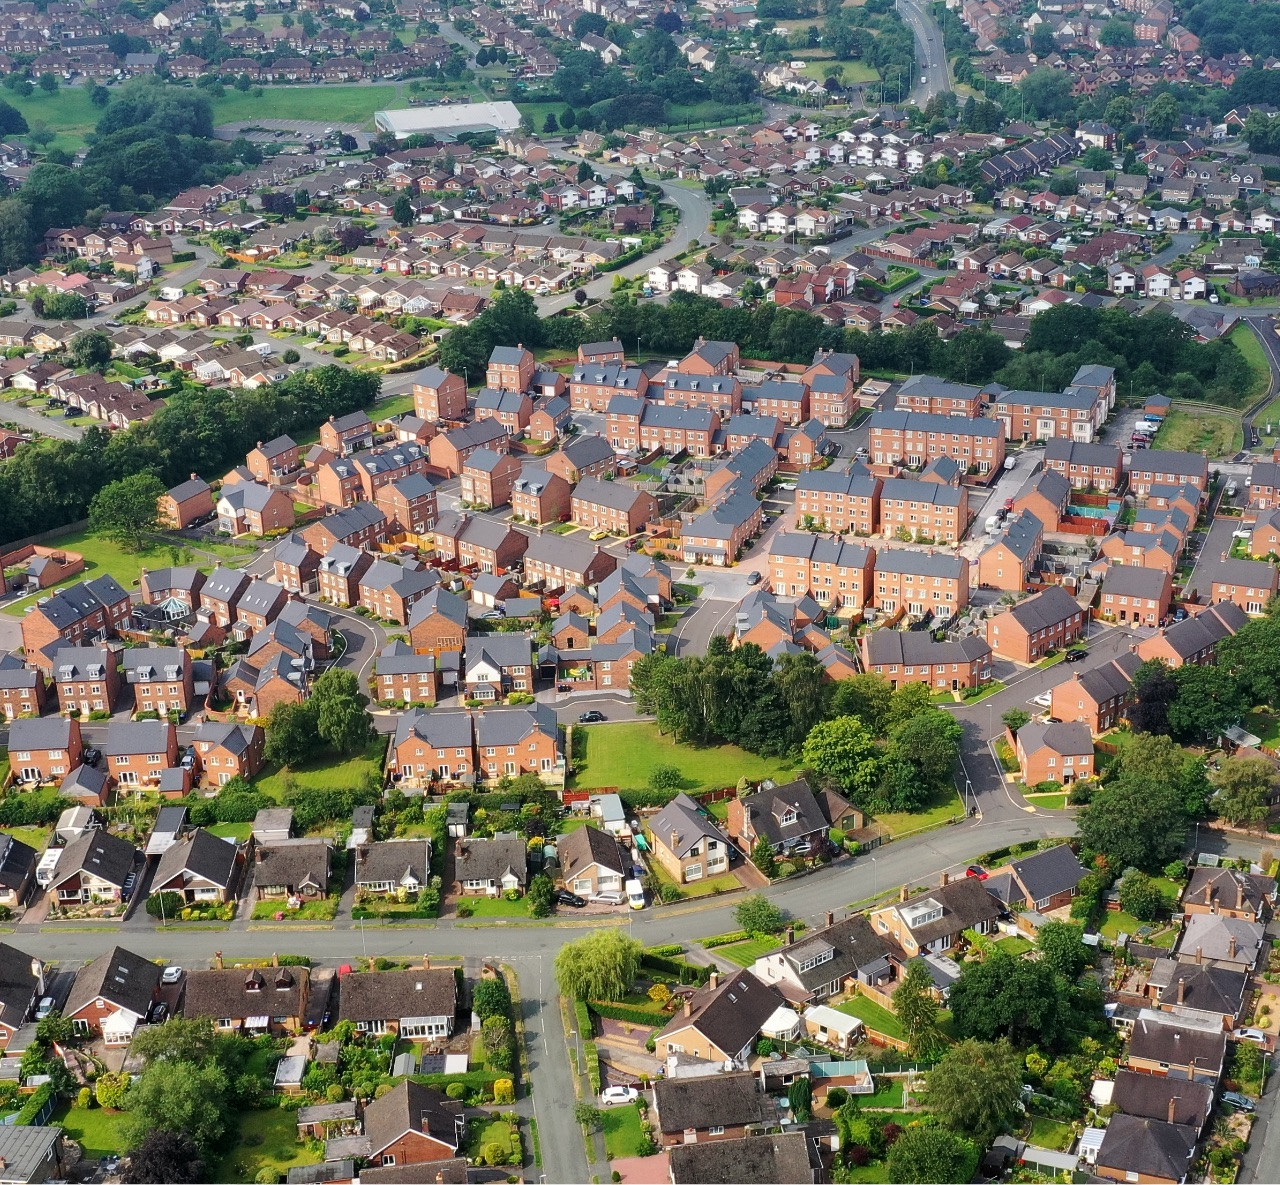 Aerial view of a housing development.